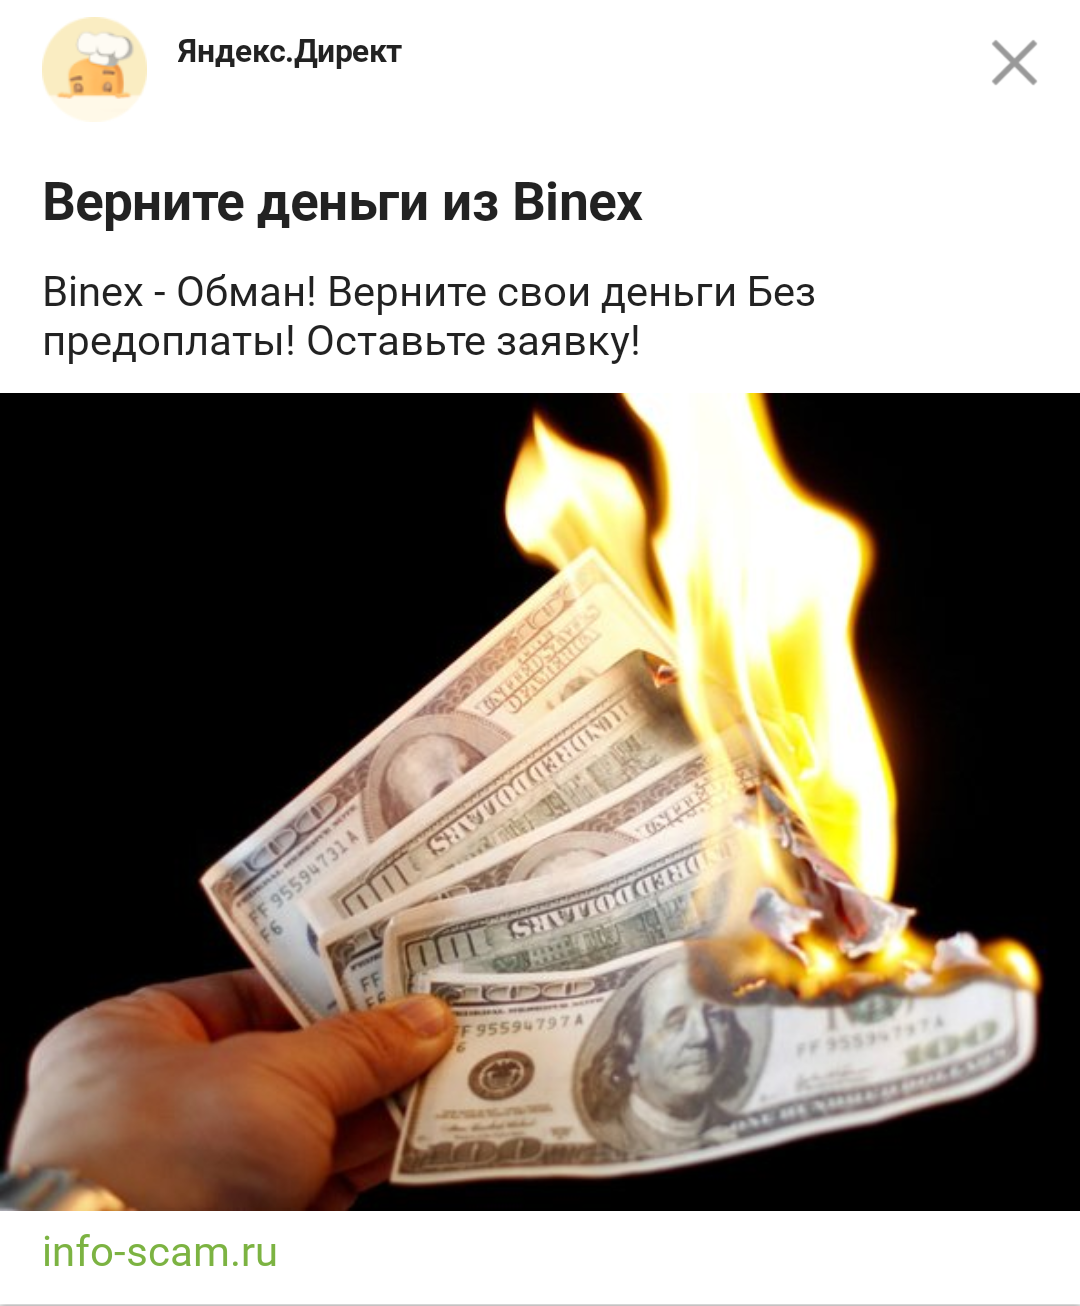 This is some new bottom level. - Advertising, Yandex Direct